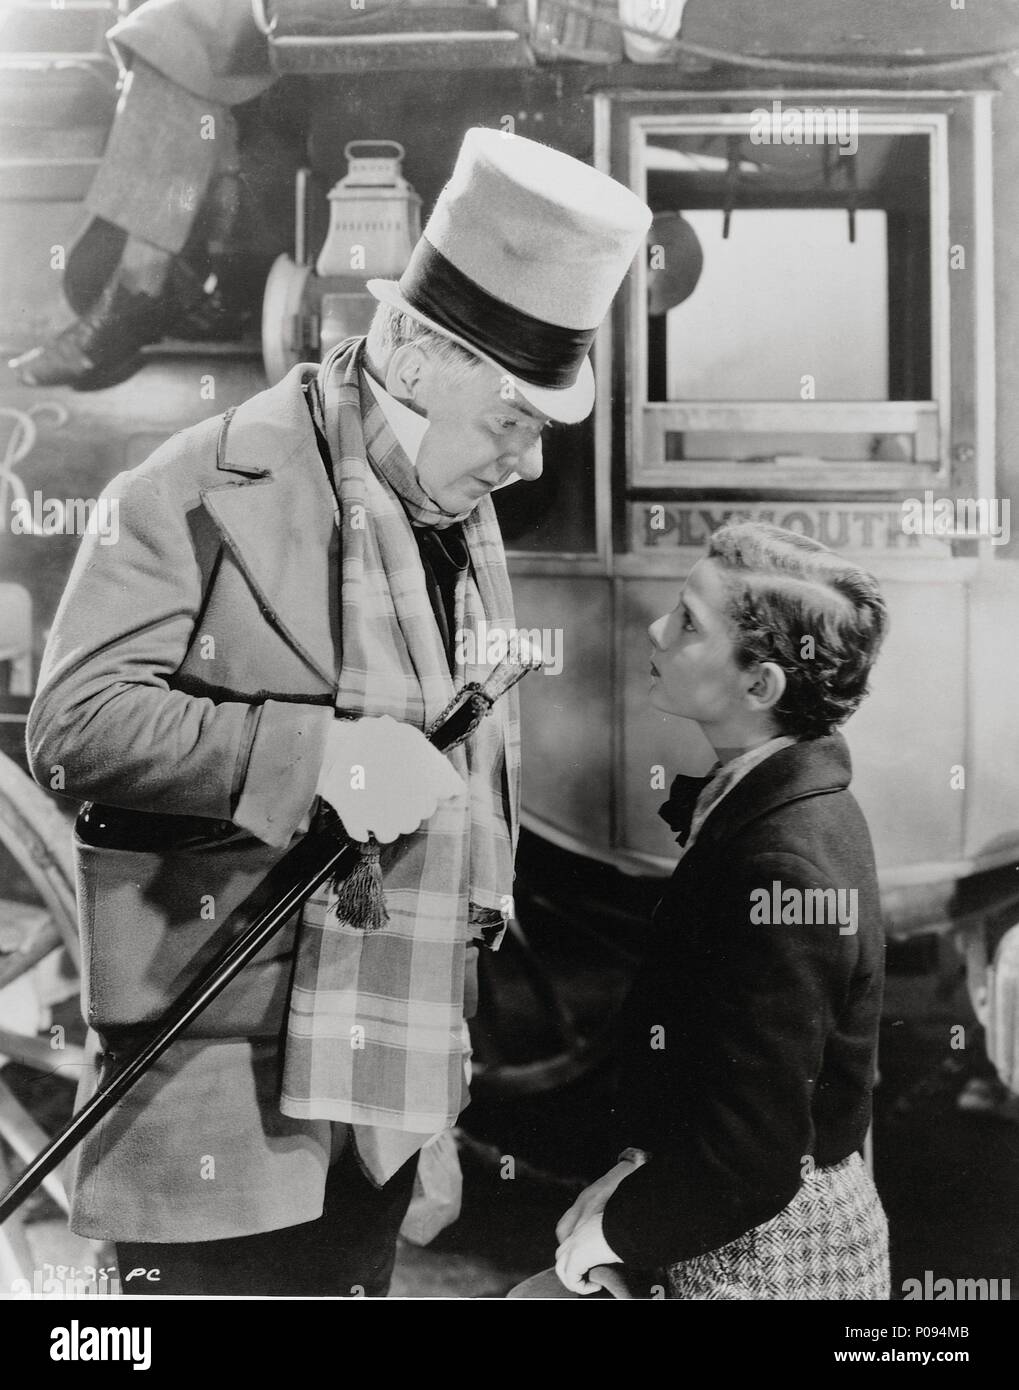 Original Film Title: THE PERSONAL HISTORY, ADVENTURES, EXPERIENCE, & OBSERVATION OF DAVID COPPERFIELD THE YOUNGER.  English Title: DAVID COPPERFIELD.  Film Director: GEORGE CUKOR.  Year: 1935.  Stars: W. C. FIELDS; FREDDIE BARTHOLOMEW. Credit: M.G.M / Album Stock Photo